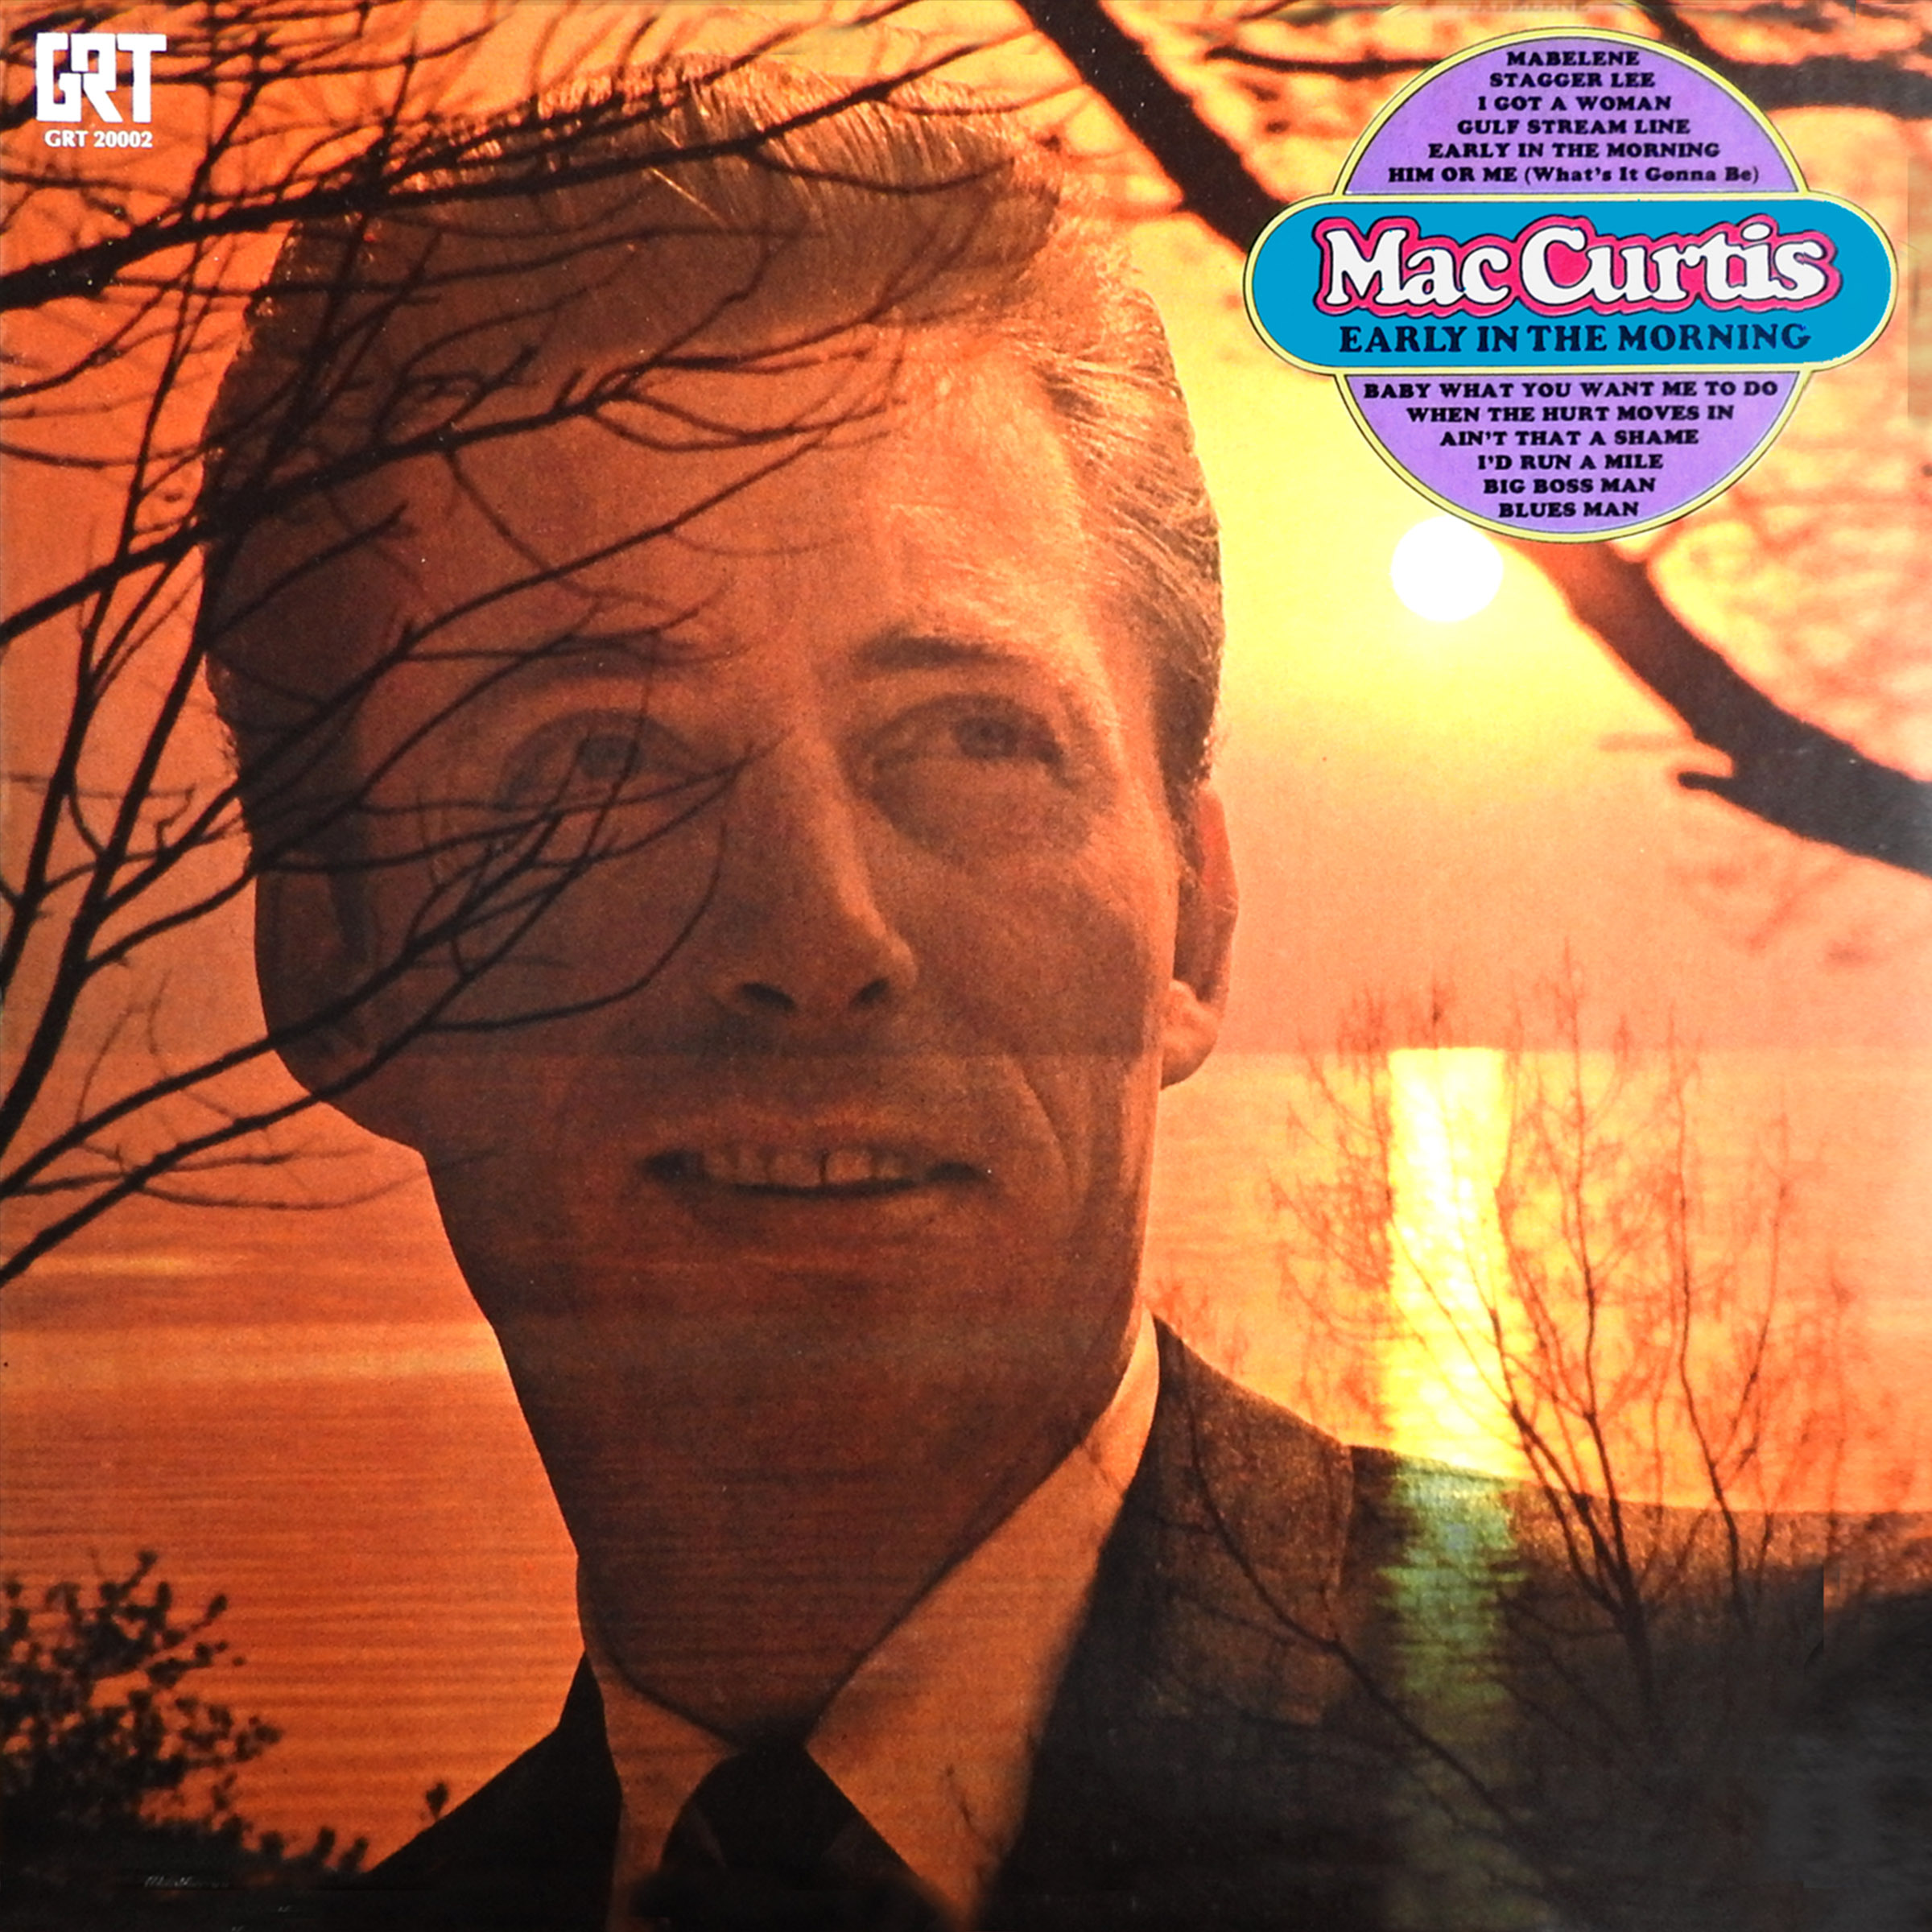 Mac Curtis - Early in the Morning / Nashville Ma - CD